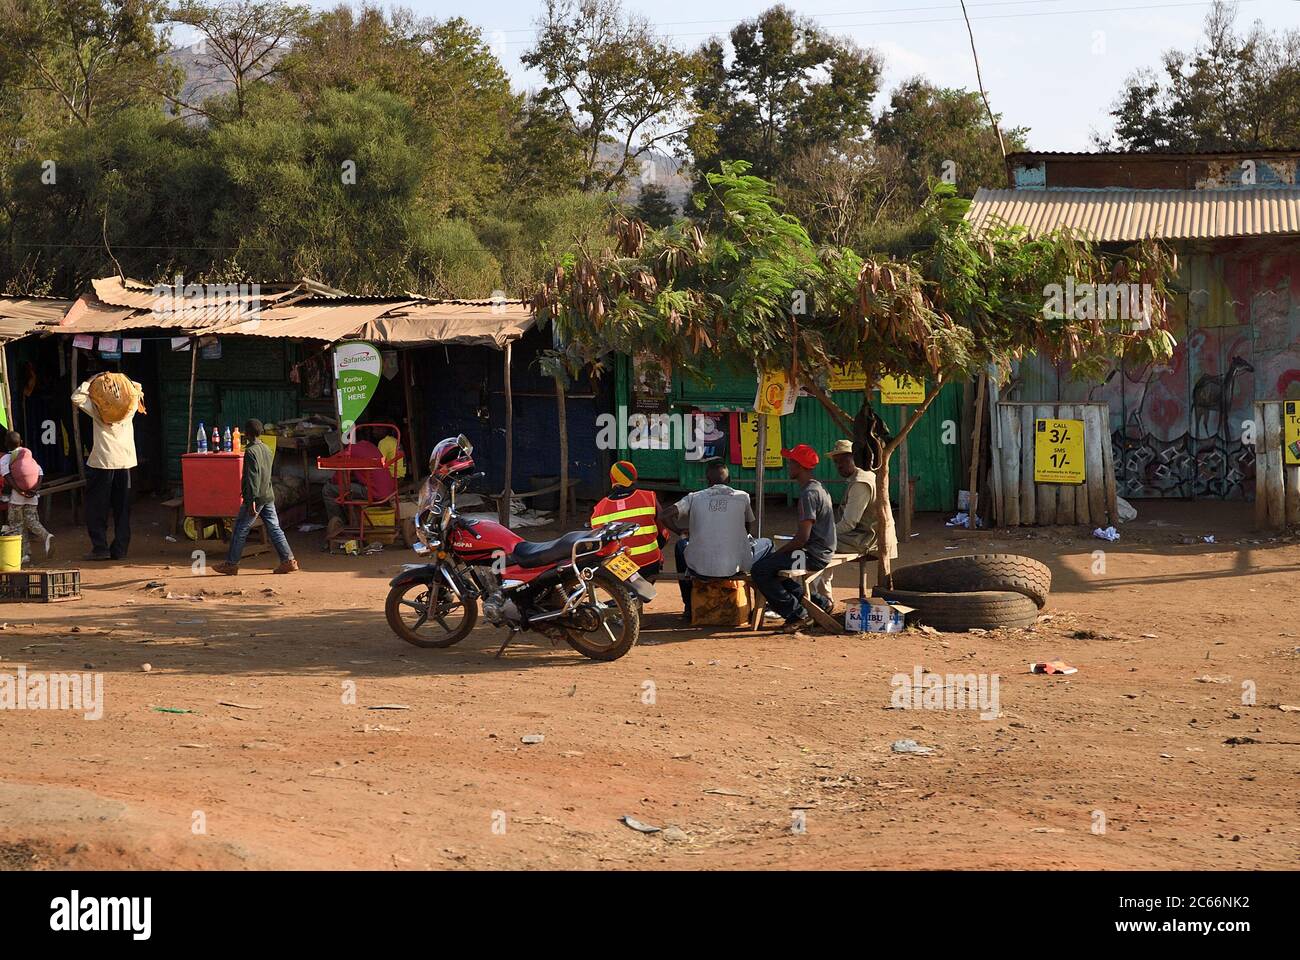 Kenya, Africa - August 22, 2010: Local people on the rural market in slum along the road nearby Nairobi Stock Photo